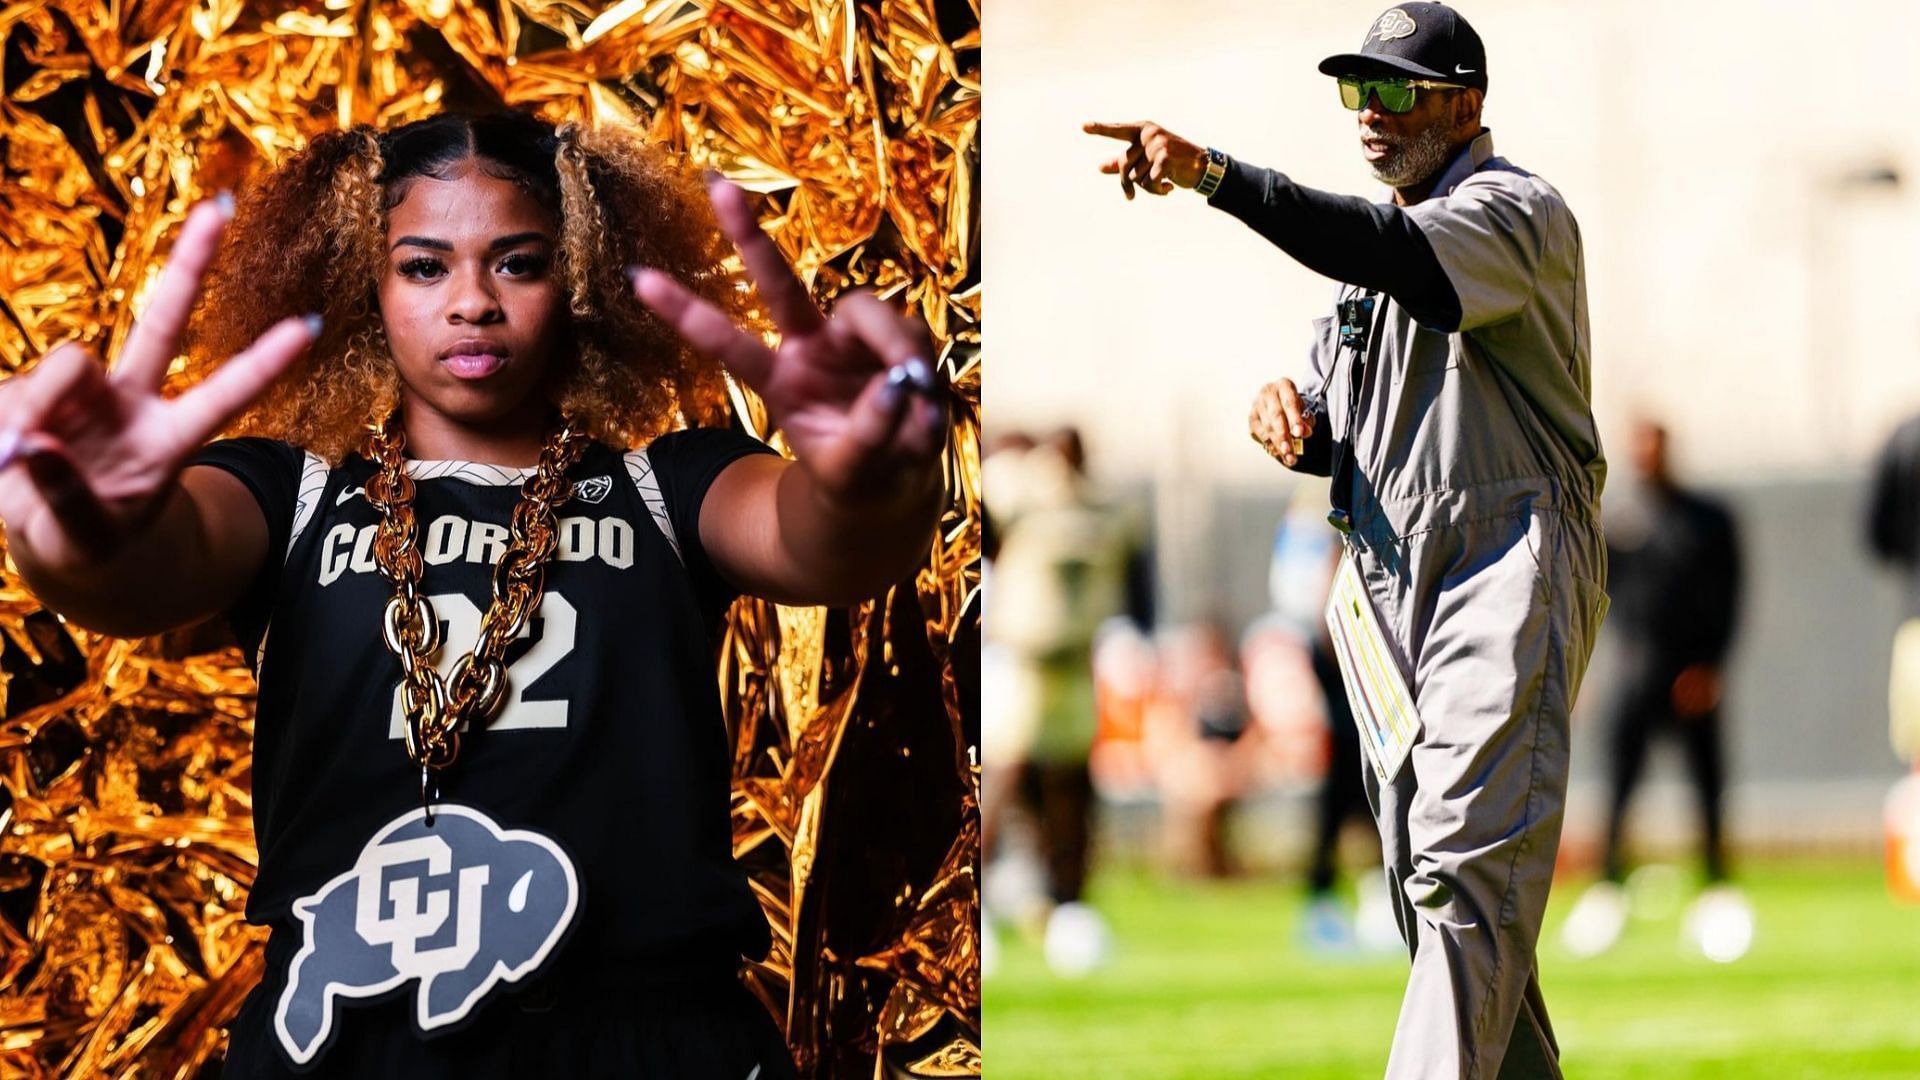 Shelomi Sanders and her father Colorado coach Deion Sanders